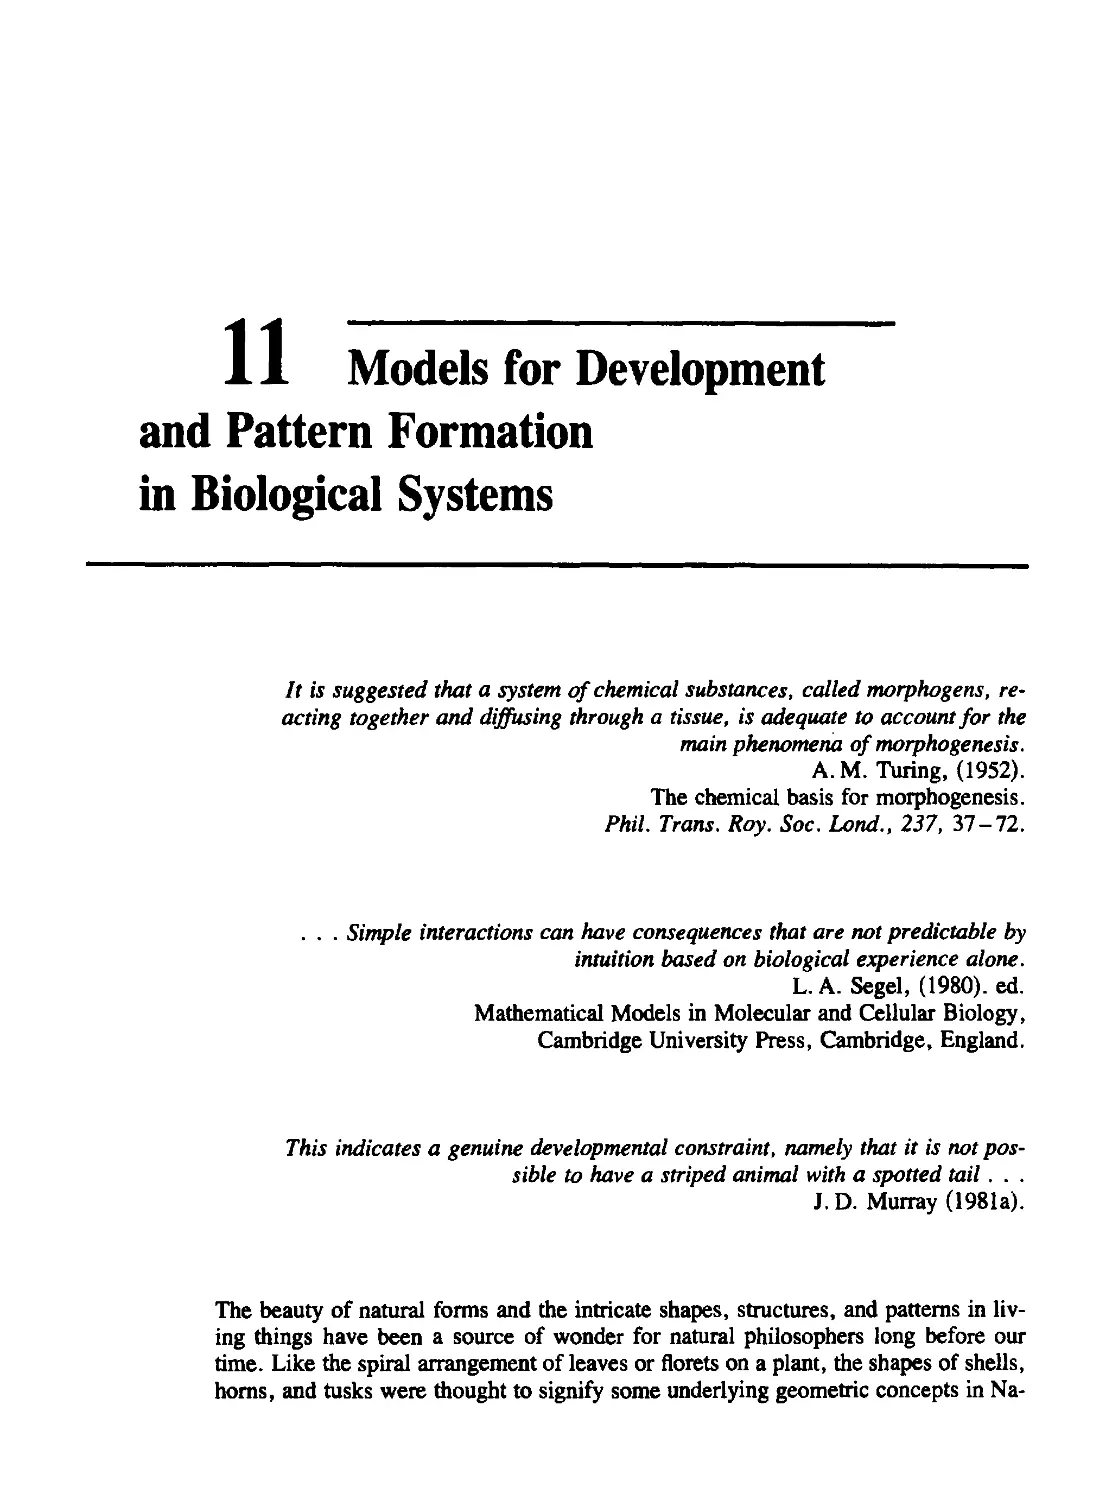 Chapter 11 Models for Development and Pattern Formation in Biological Systems